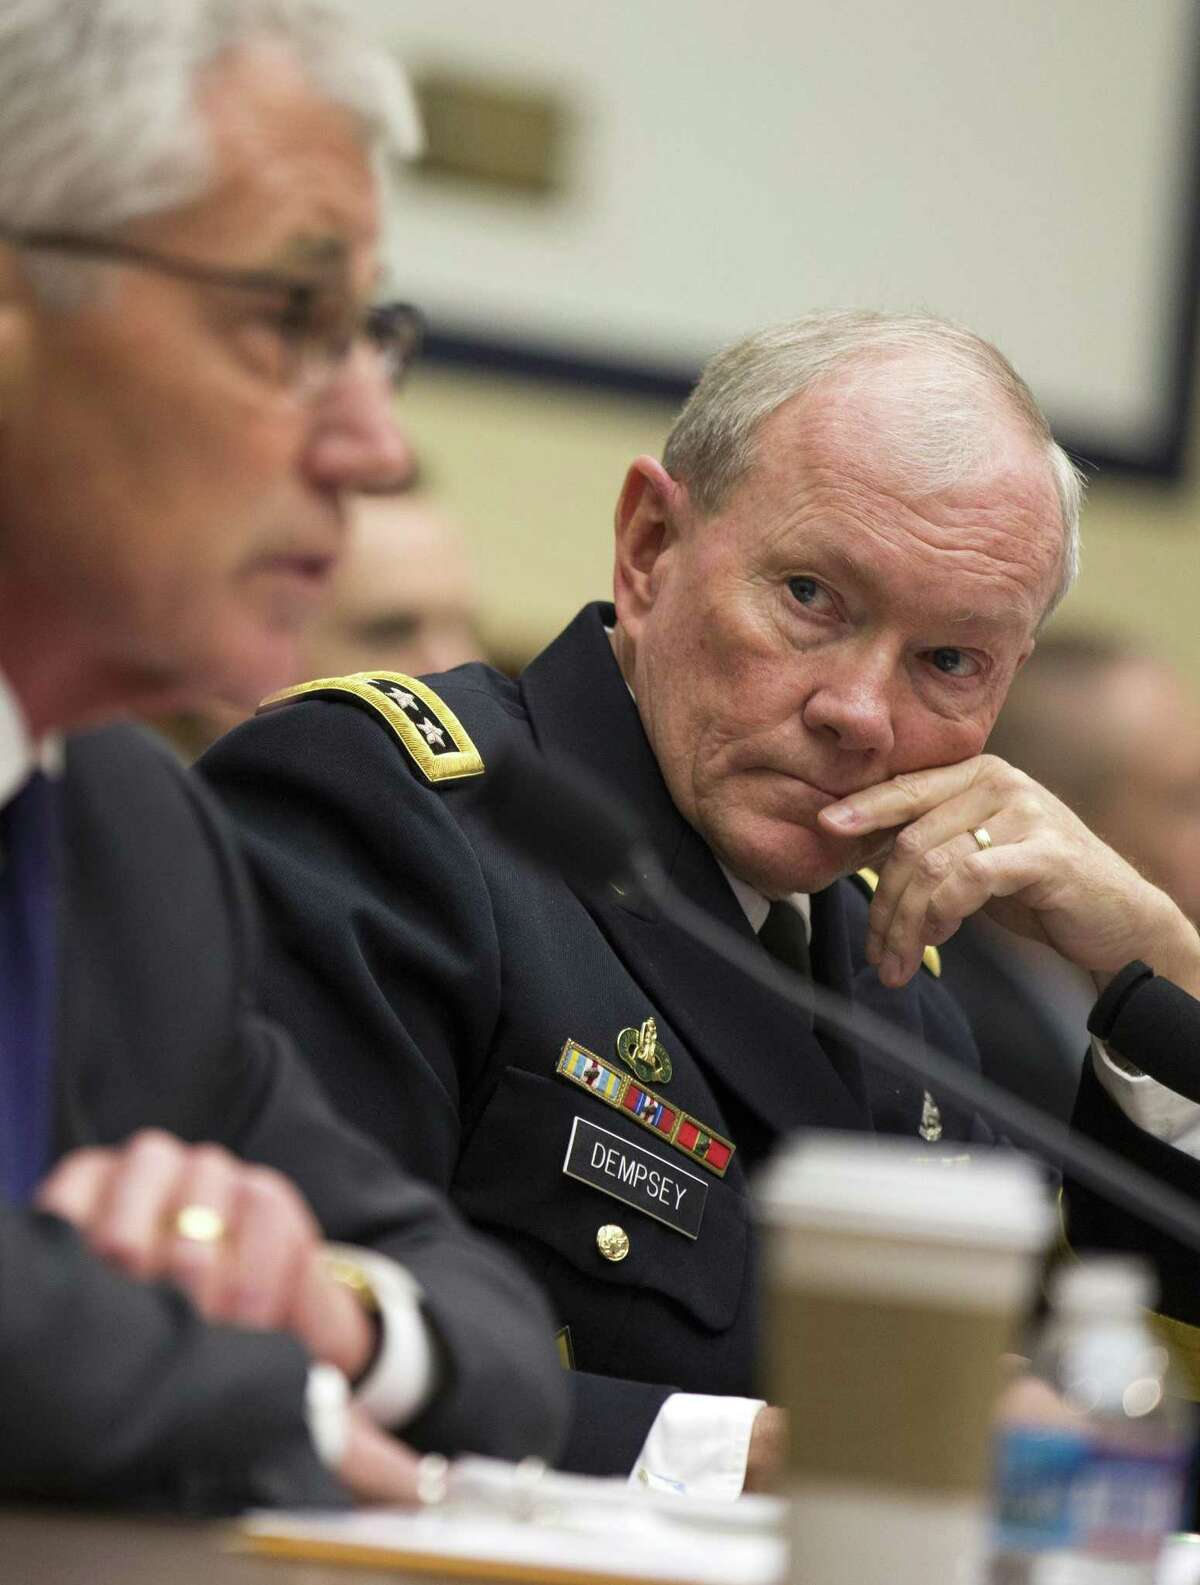 Joint Chiefs Chairman Gen. Martin Dempsey listens, at right, as Defense Secretary Chuck Hagel testifies on Capitol Hill in Washington, Thursday, Nov. 13, 2014, before the House Armed Services committee hearing on the Islamic State group. (AP Photo/Evan Vucci)